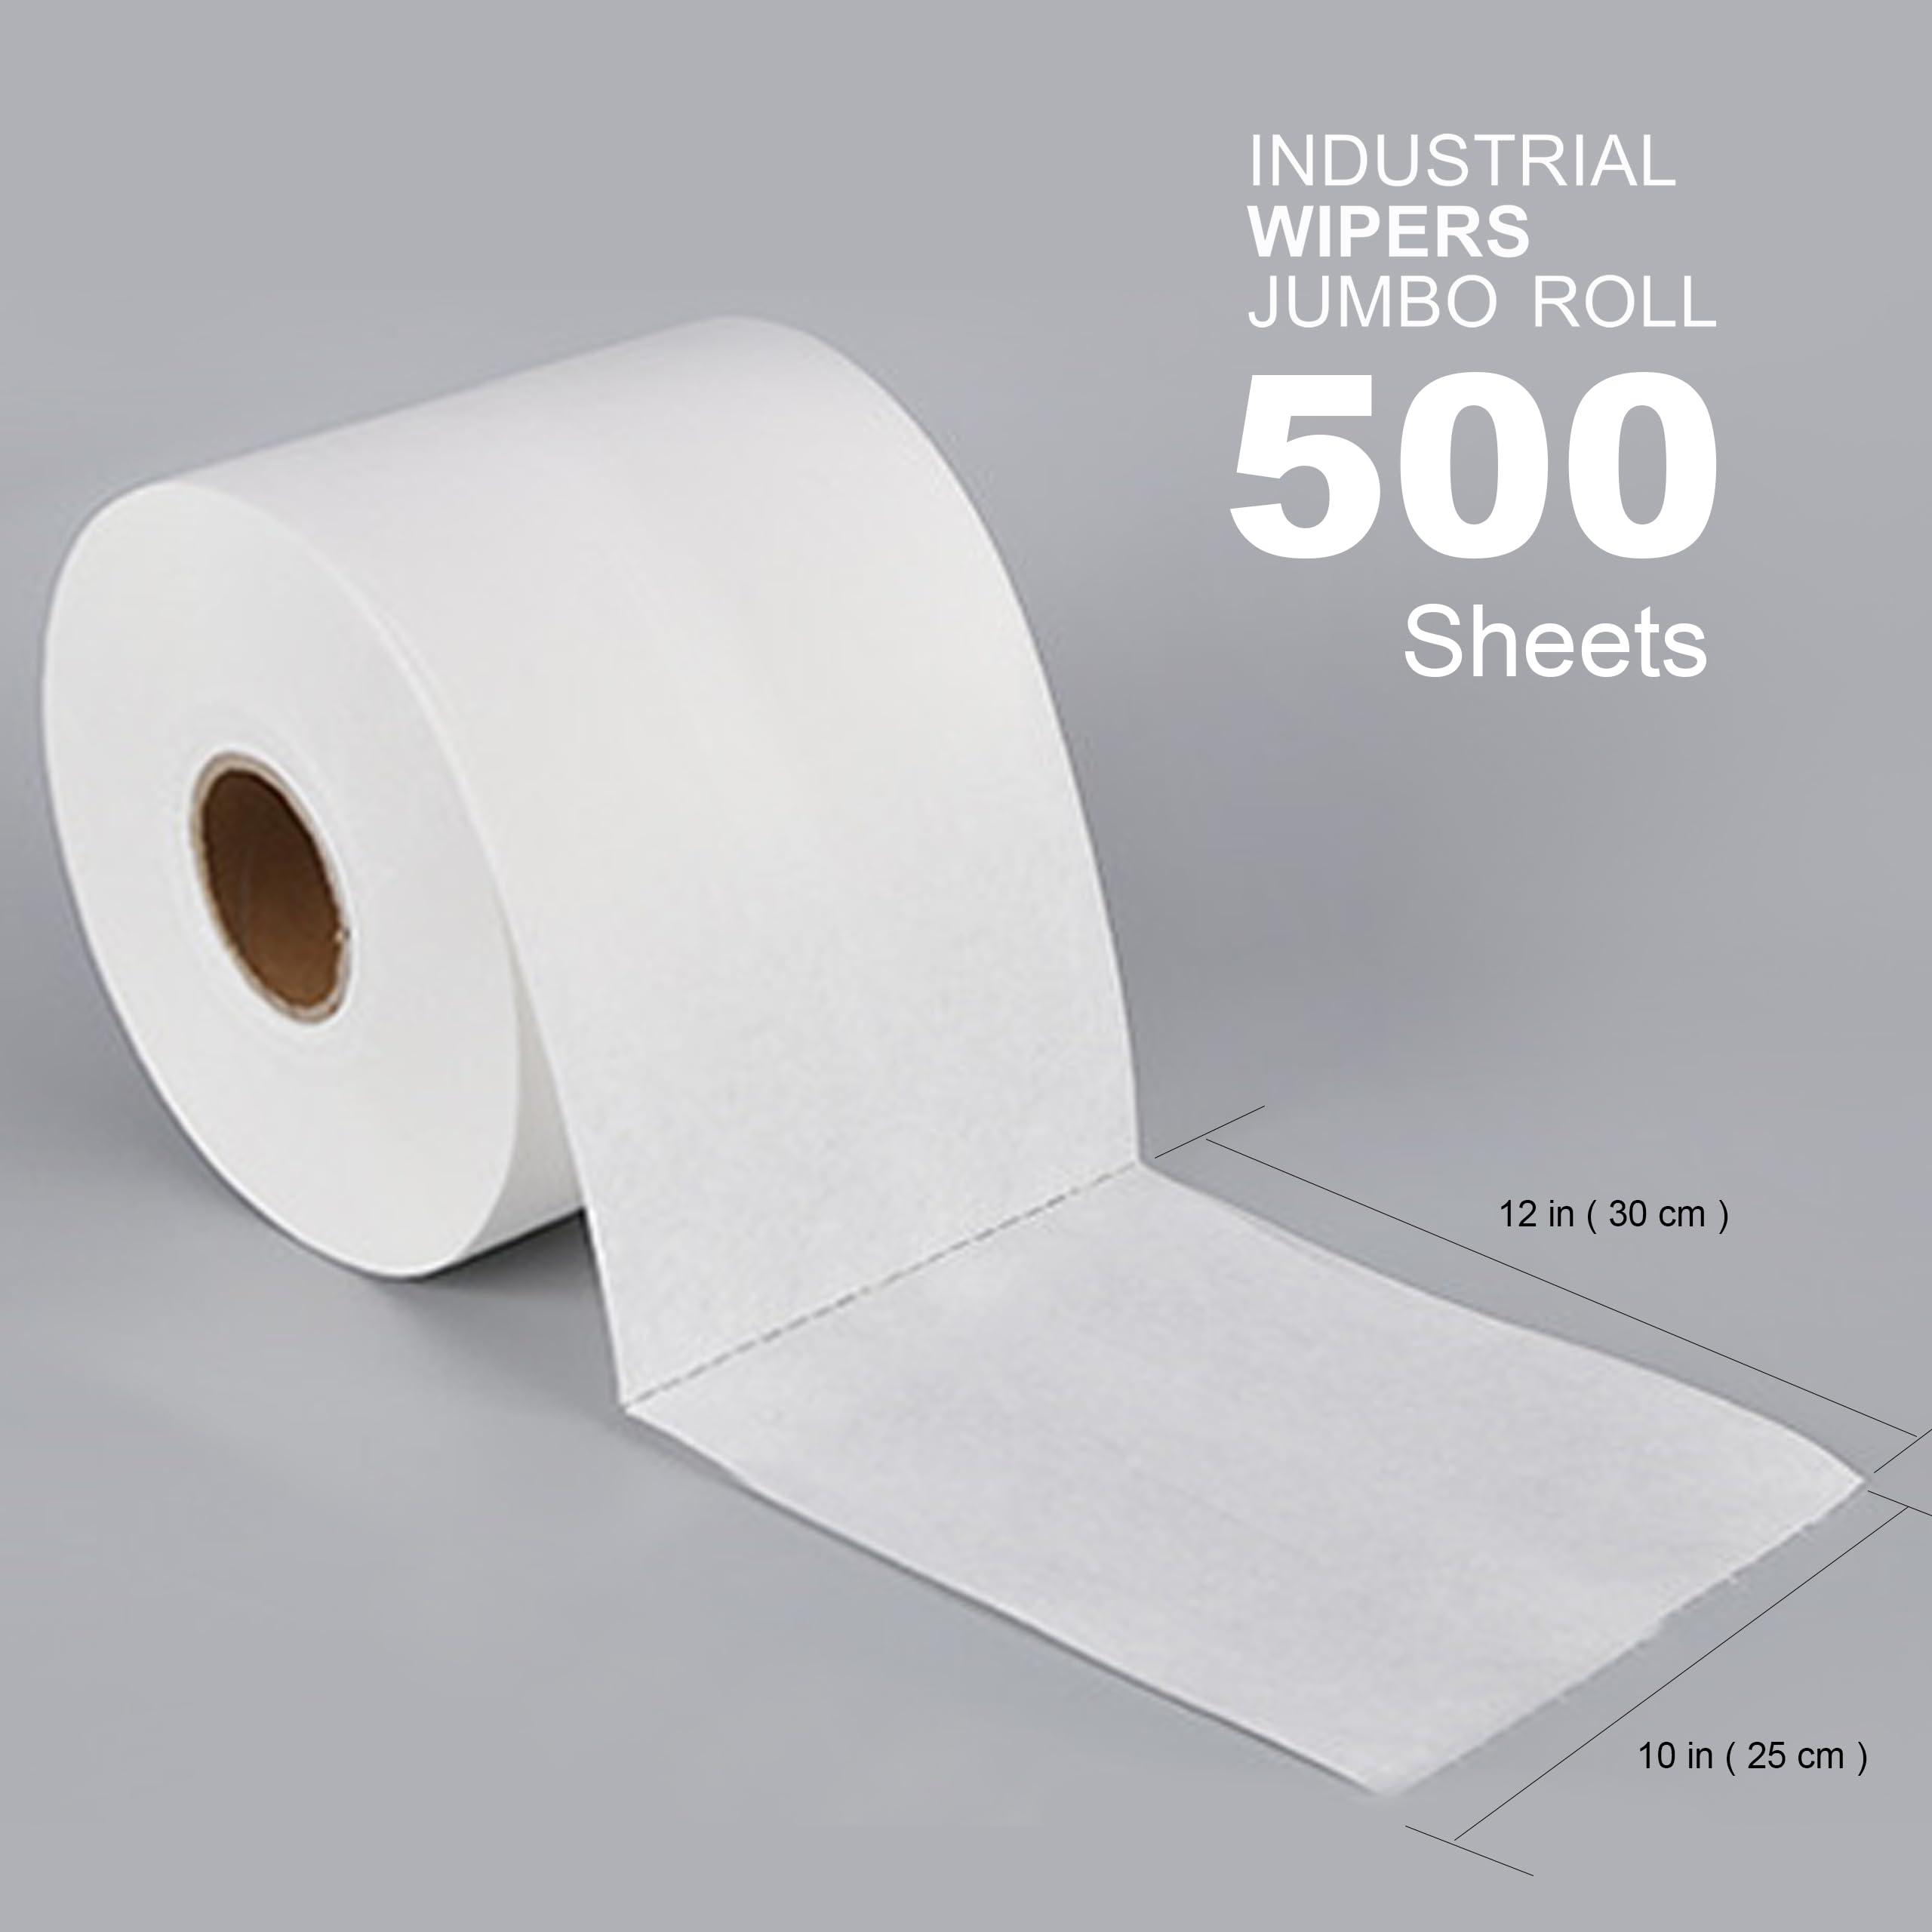 User-Friendly Design: Features a perforated design for easy tearing, allowing the use of single or multiple sheets as needed. Available in economical jumbo rolls, these towels offer convenience and strength for various cleaning needs.